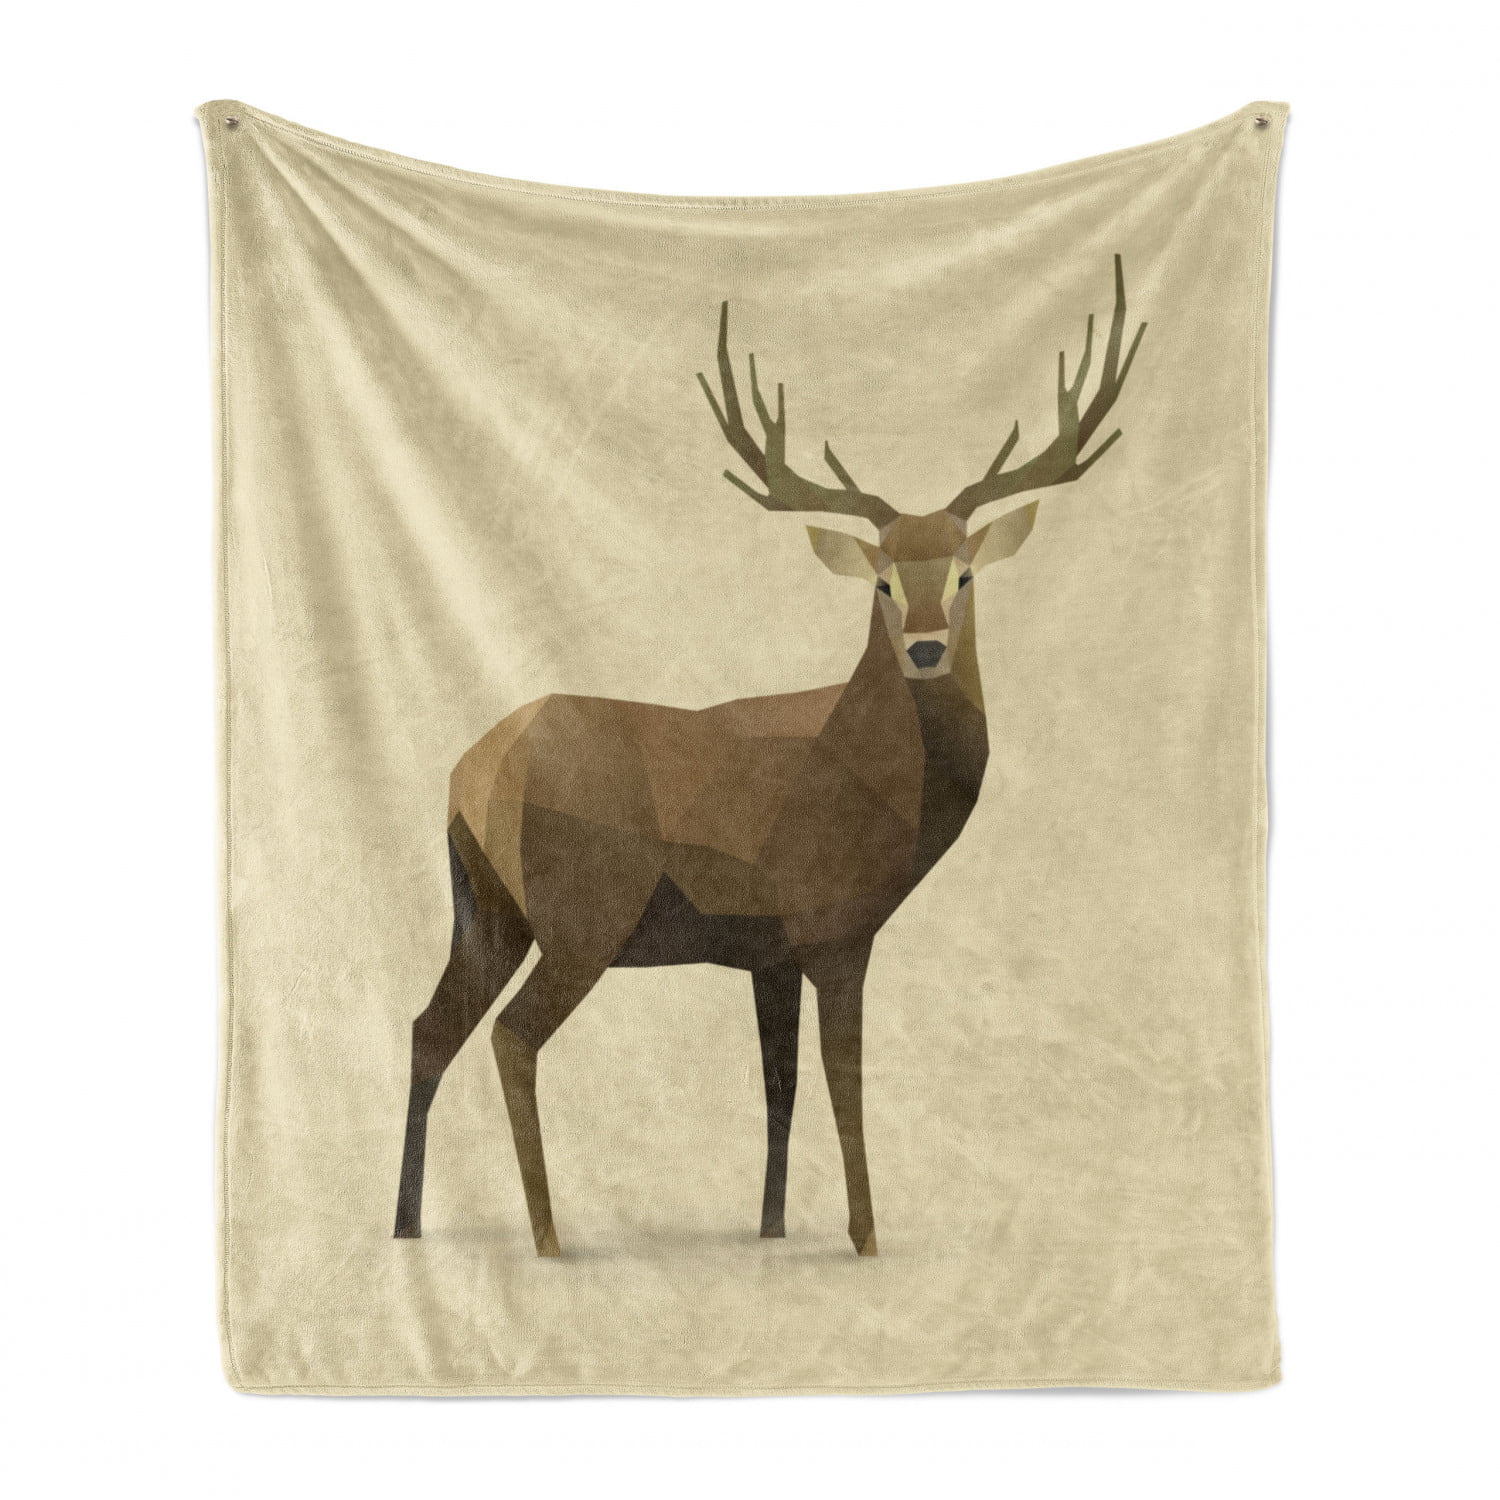 Moslion Brown Moose Throw Blanket Beautiful Animal Forest Male Bull Elk Cute Deer Big 50x60 Inch Warm Cozy Flannel Plush Throws Blankets for Bedding Sofa Couch